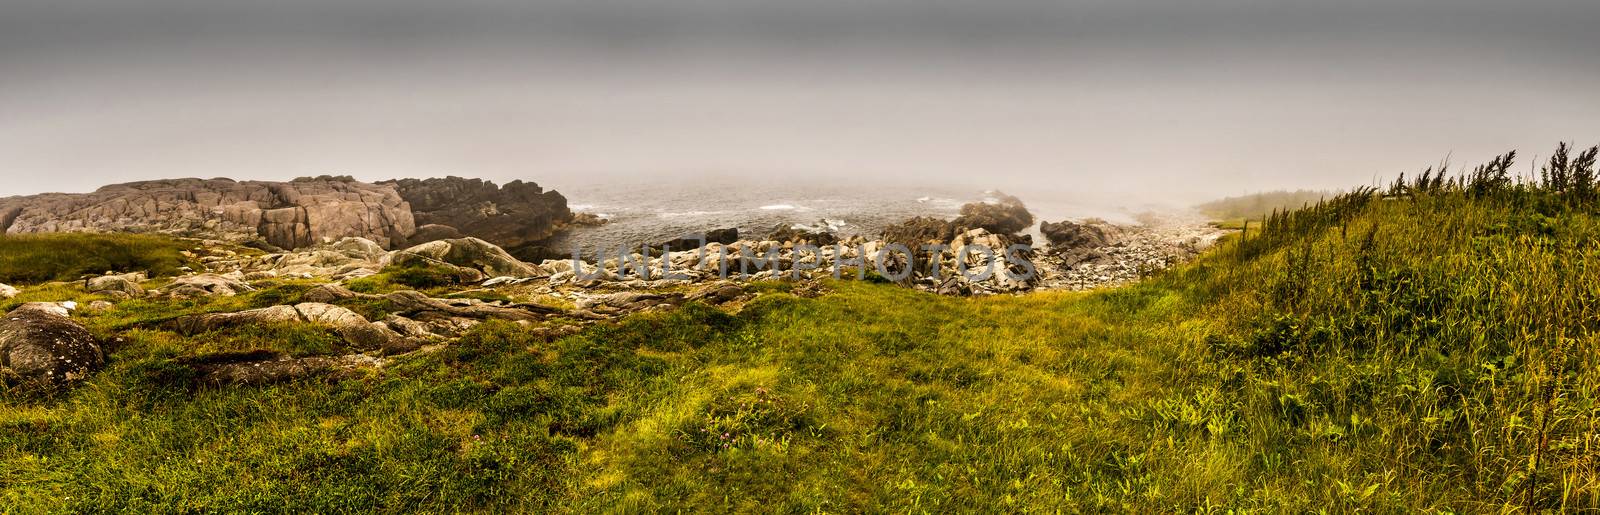 Foggy weather on a cliff and rocky beach in Nova Scotia Canada